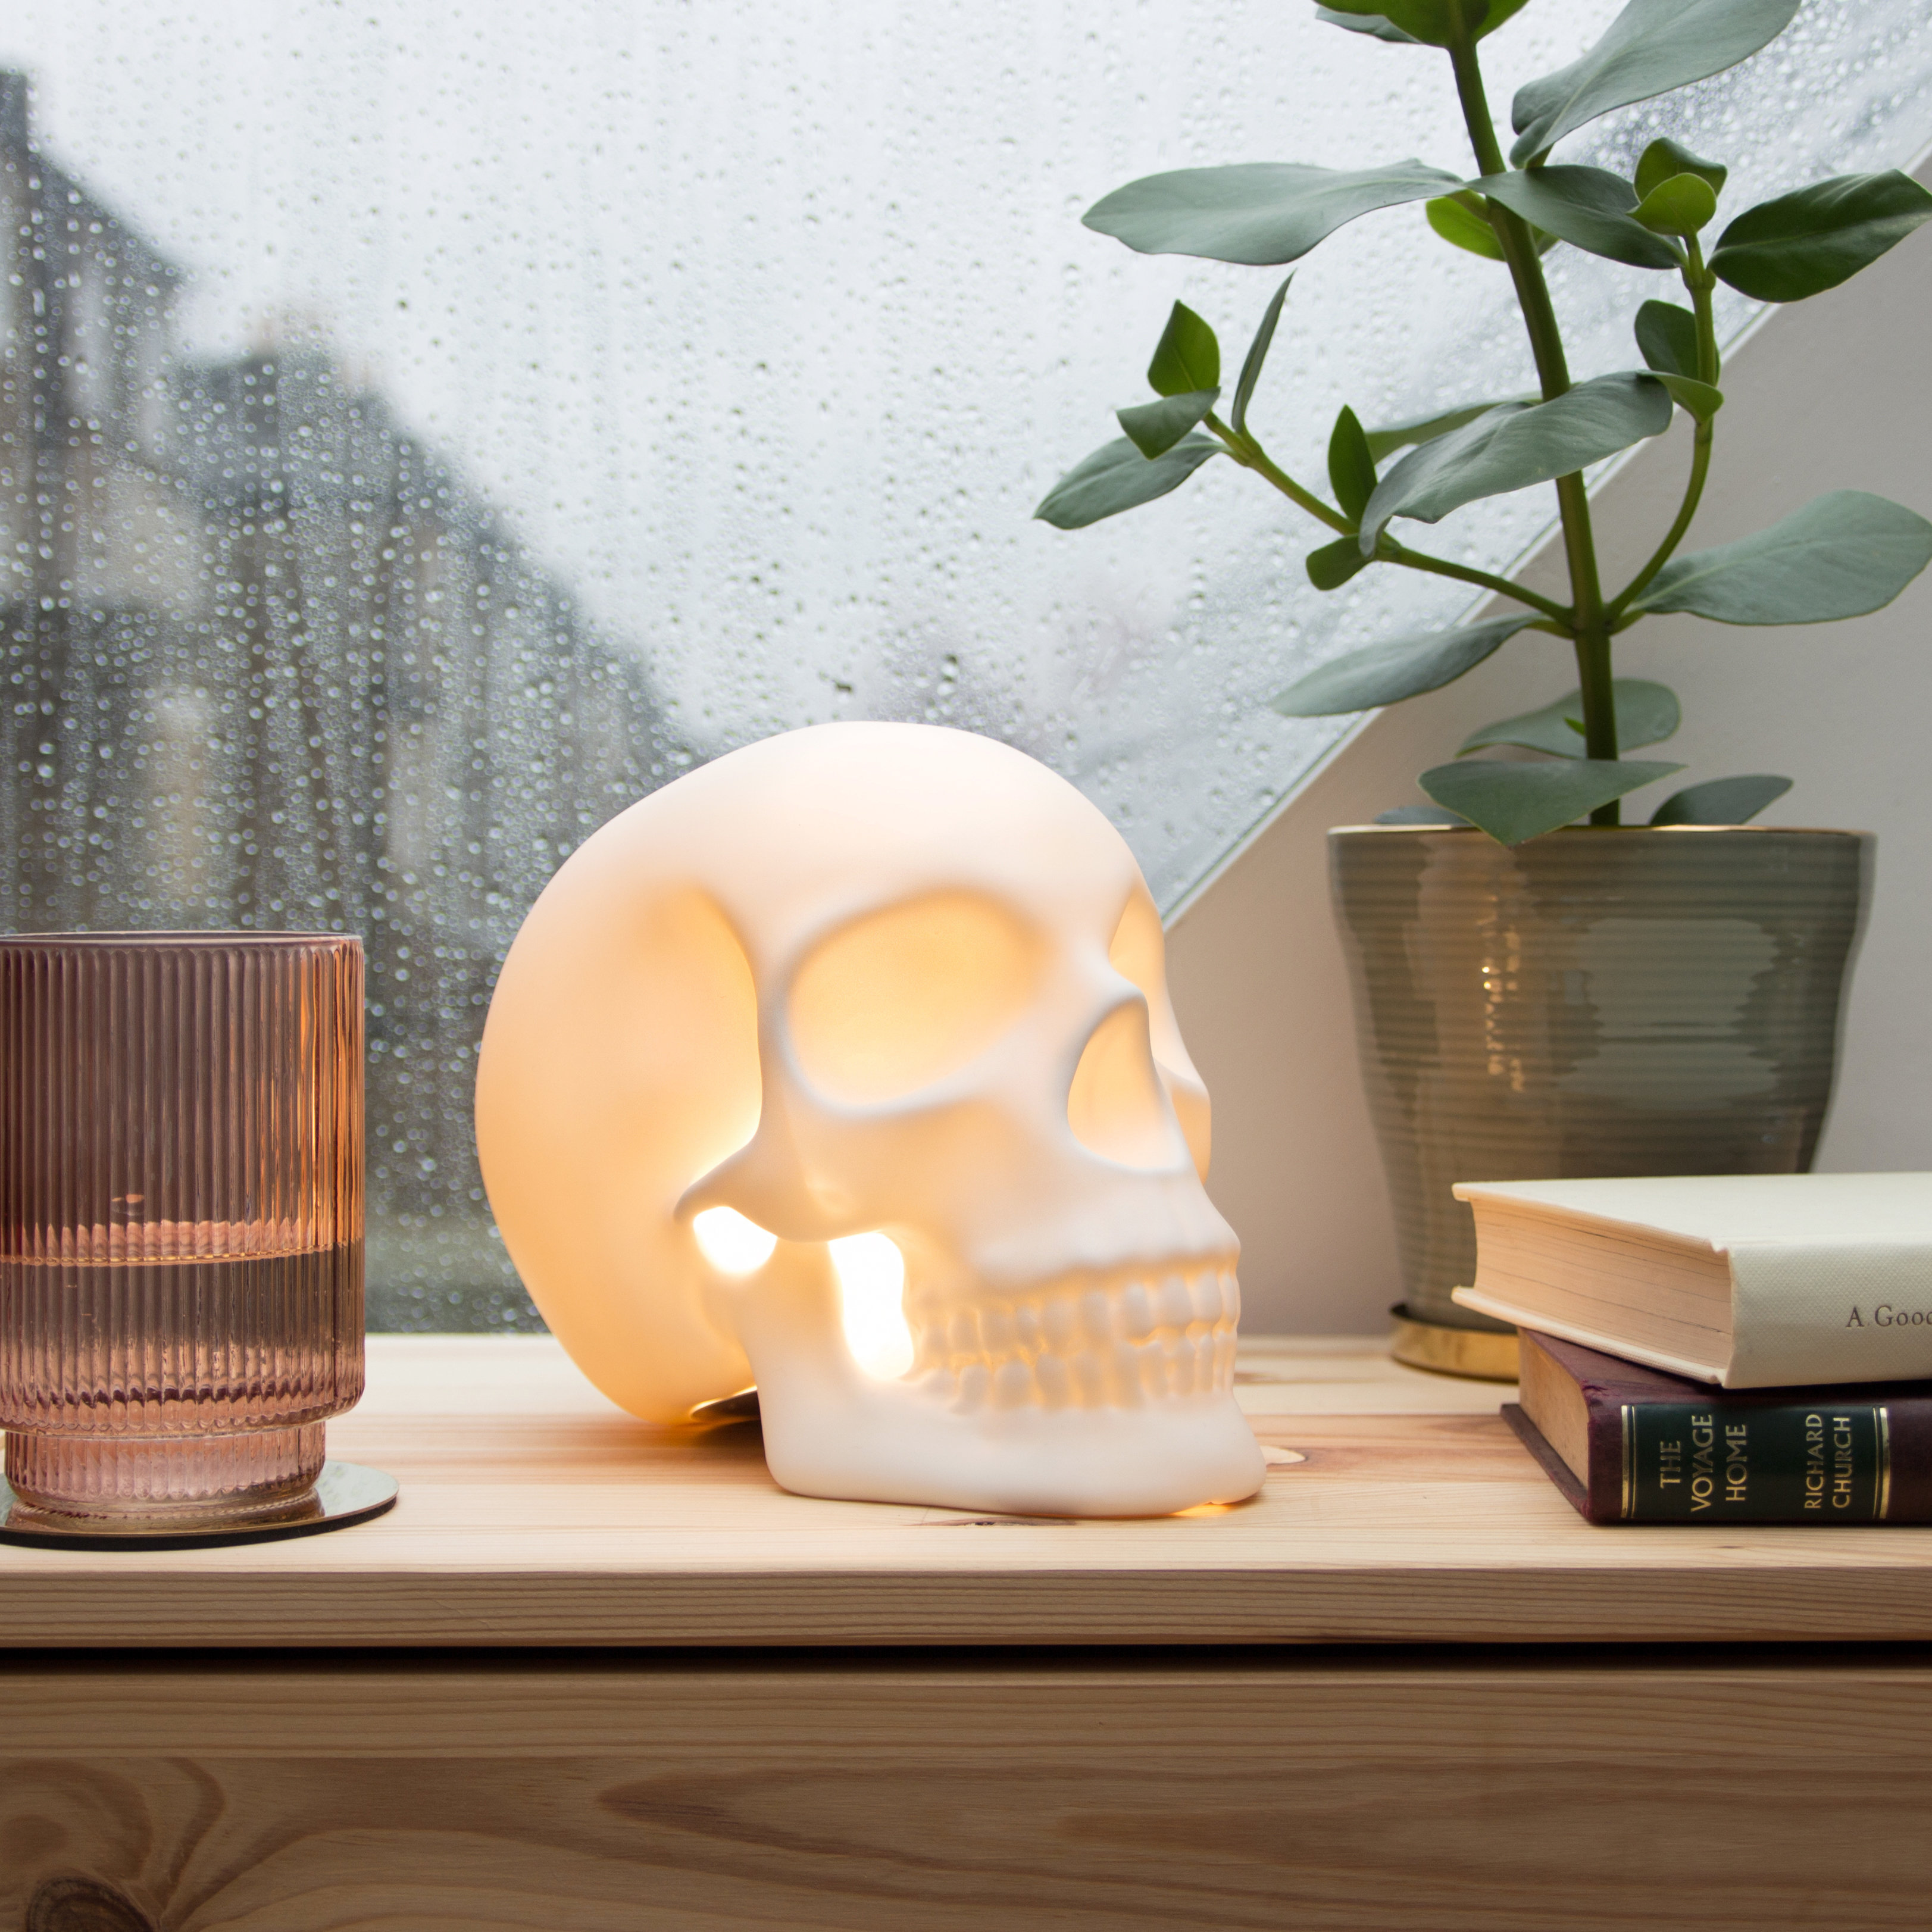 Skull table lamp on bedside table with rain on the window